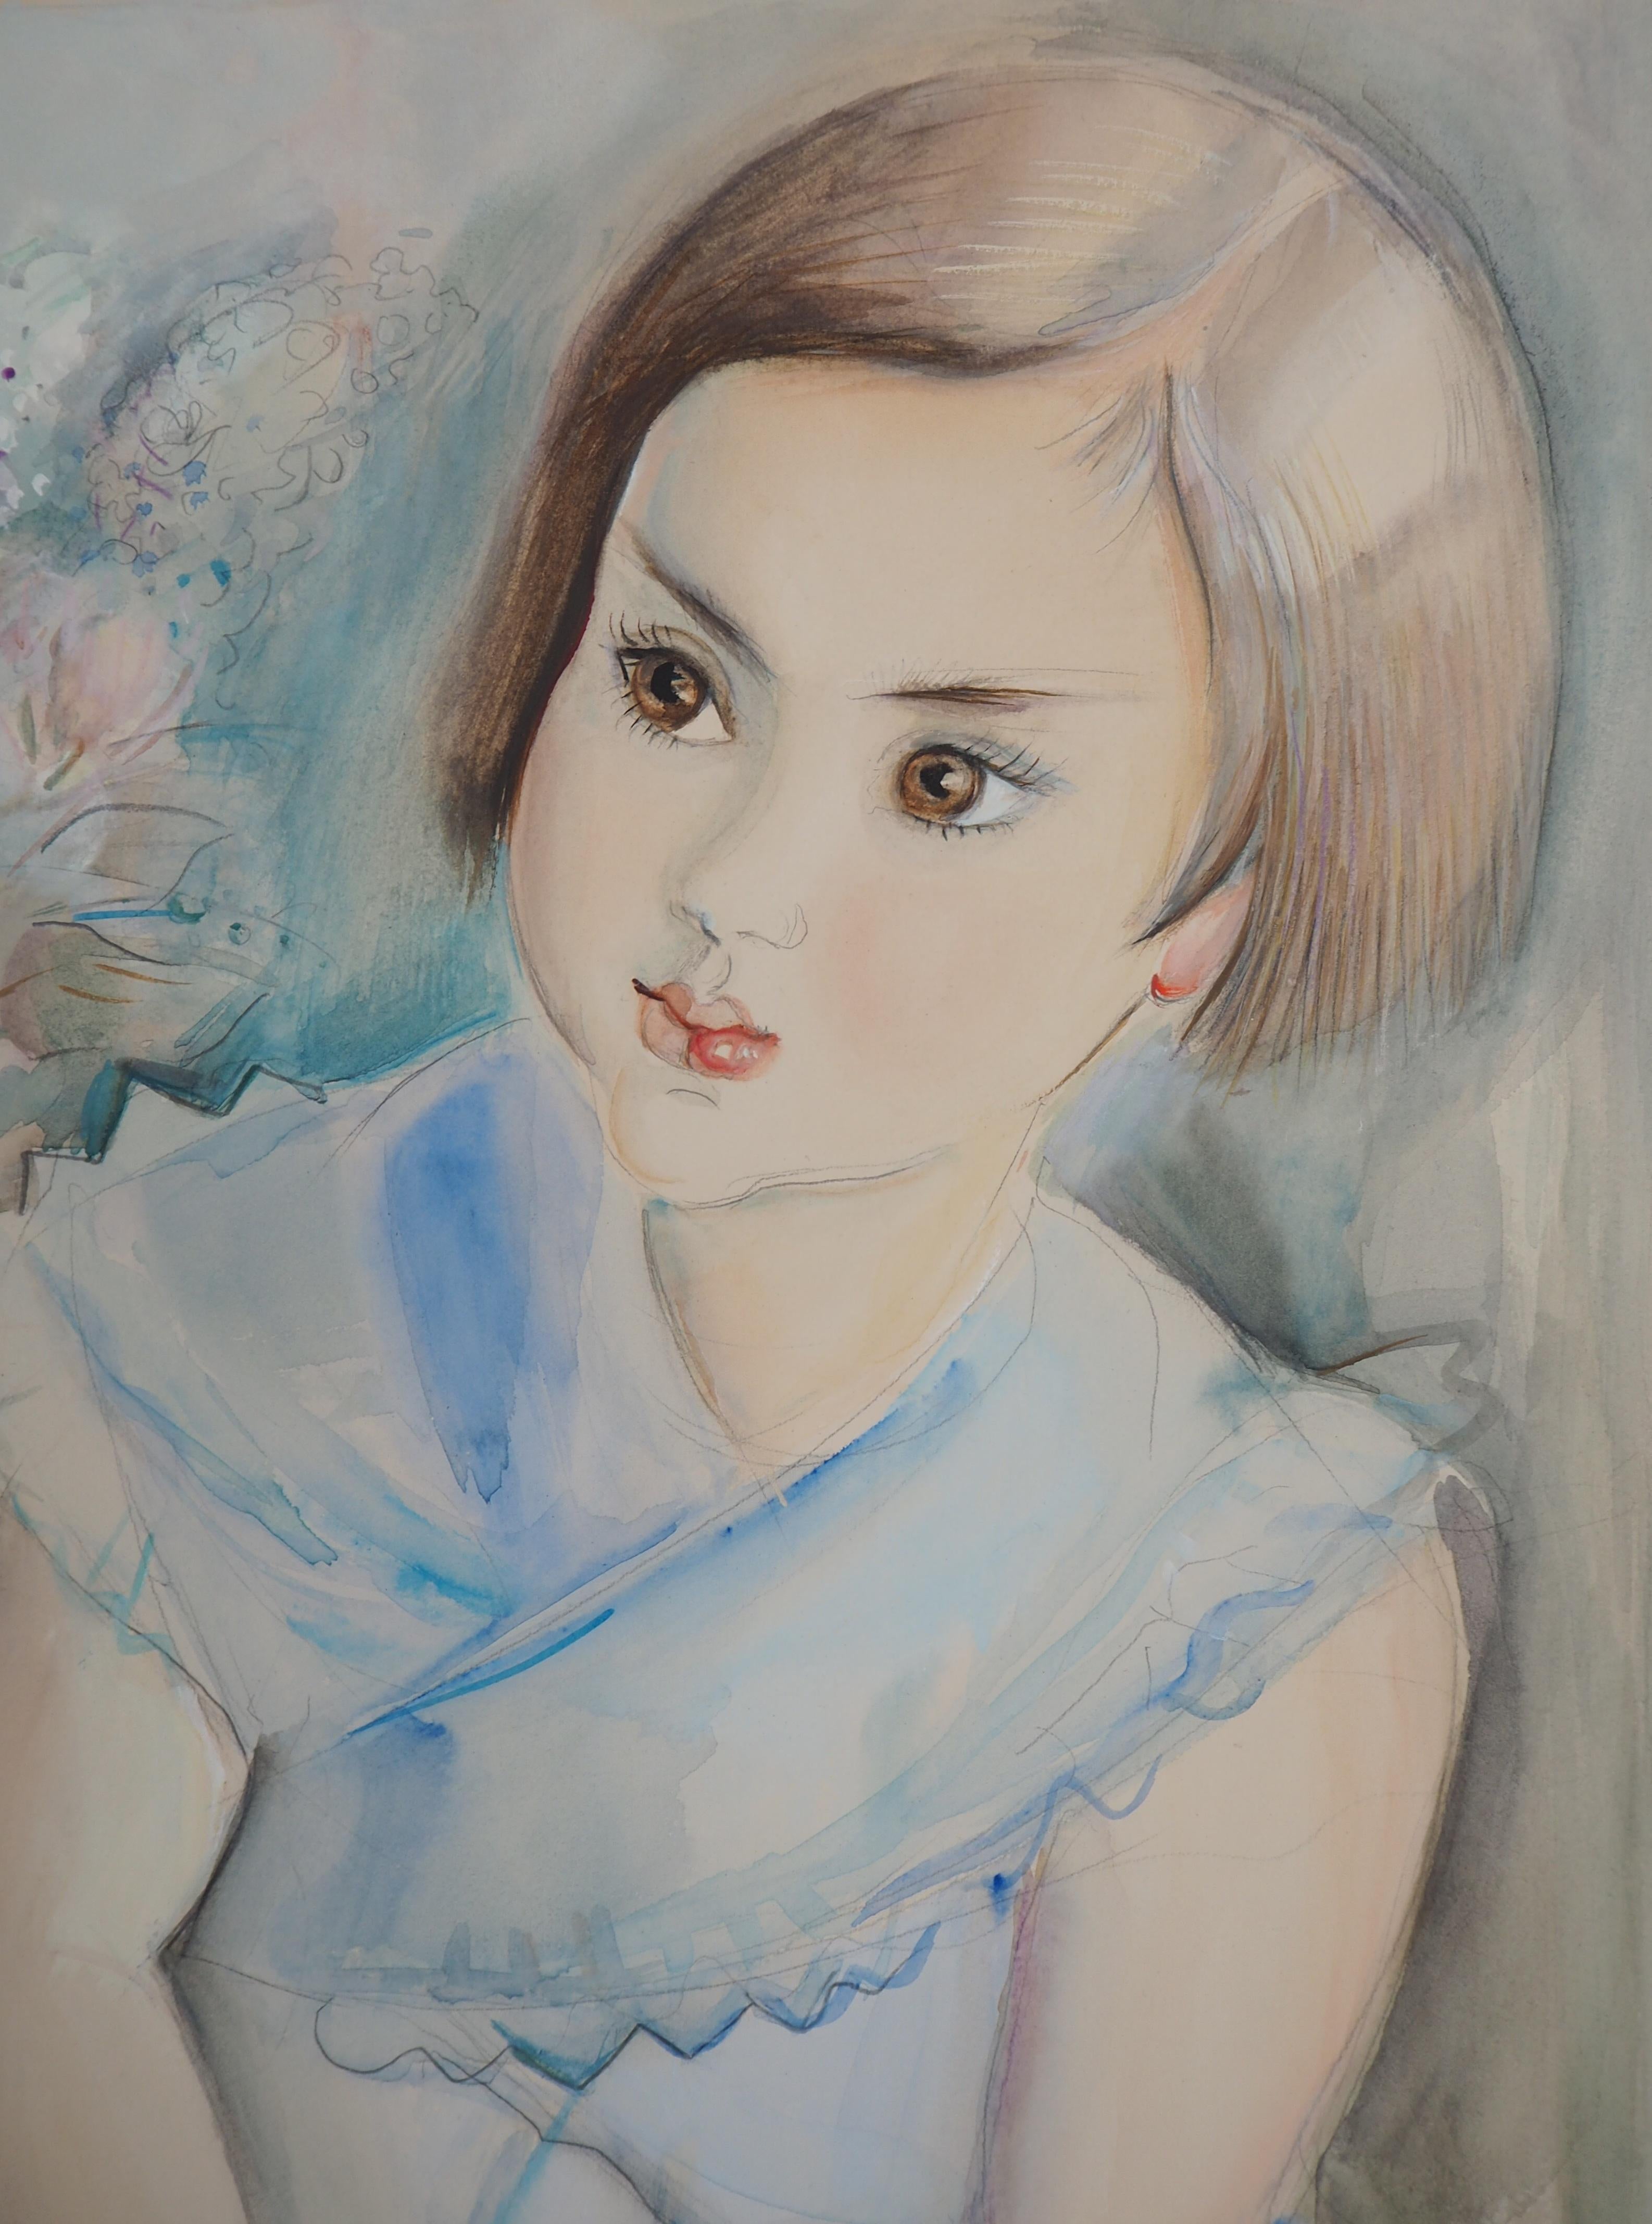 Young Girl with Violets - Original Watercolor and Gouache Painting, Signed - Modern Art by Mily Possoz